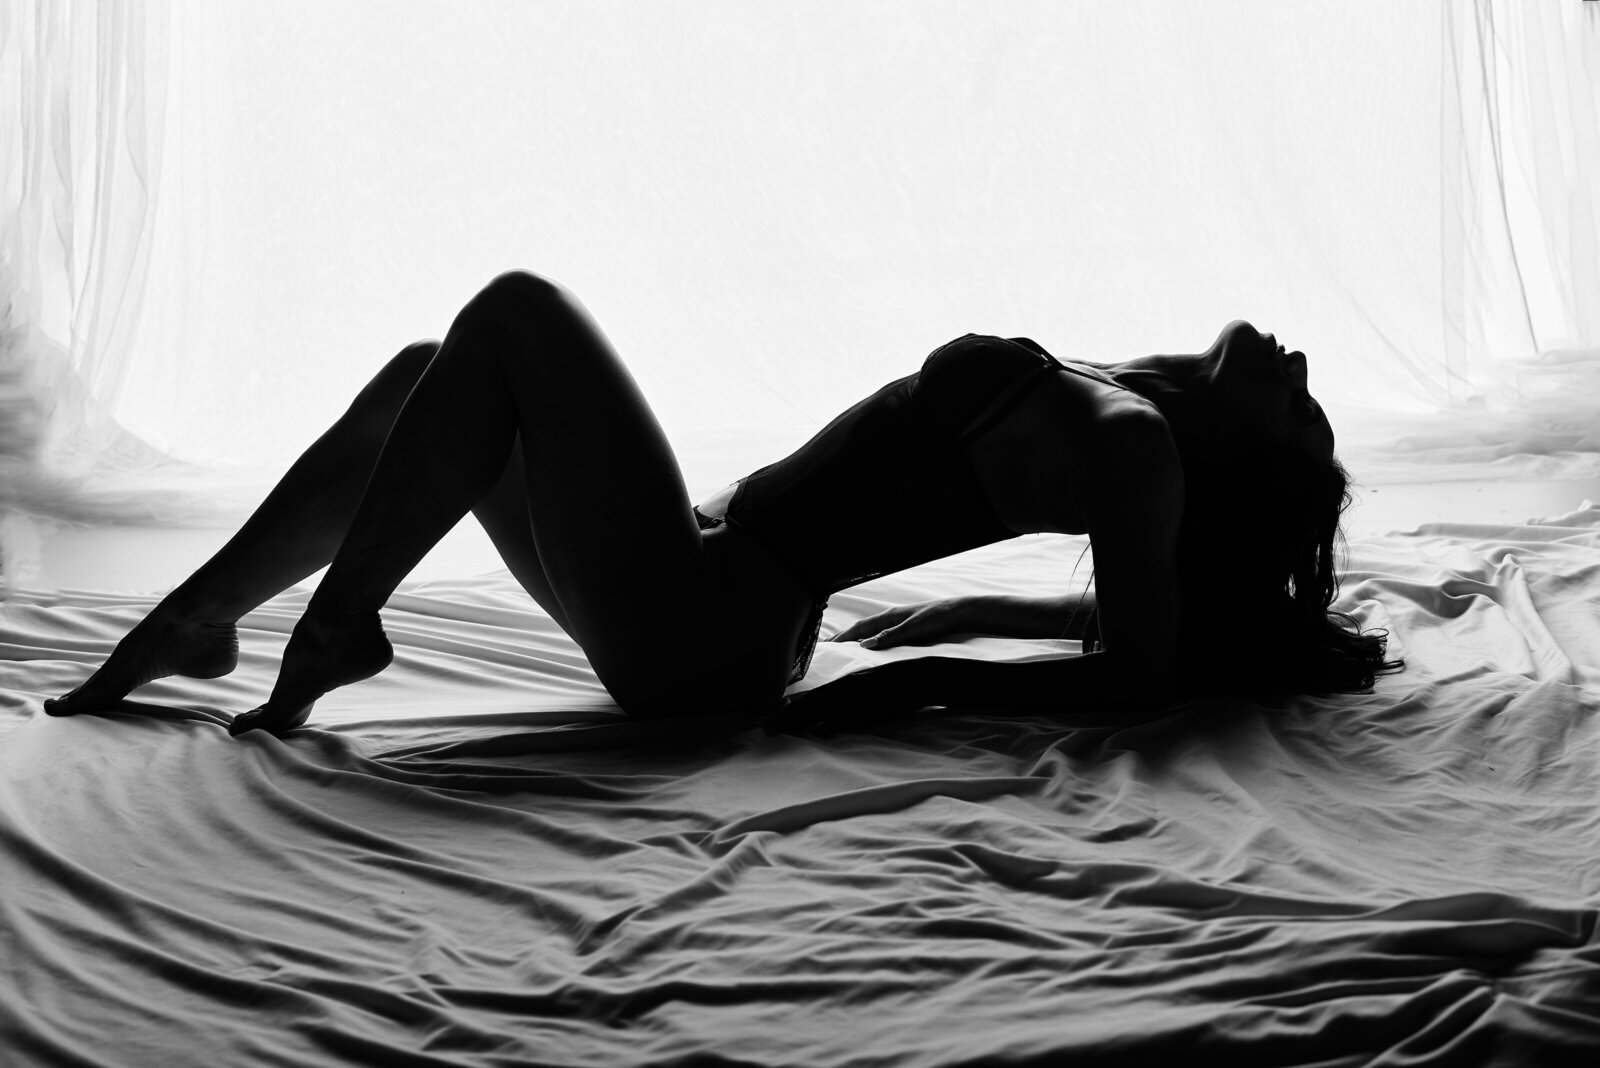 A gorgeous black and white silhouette of a  woman in lingerie laying in bed sheets.